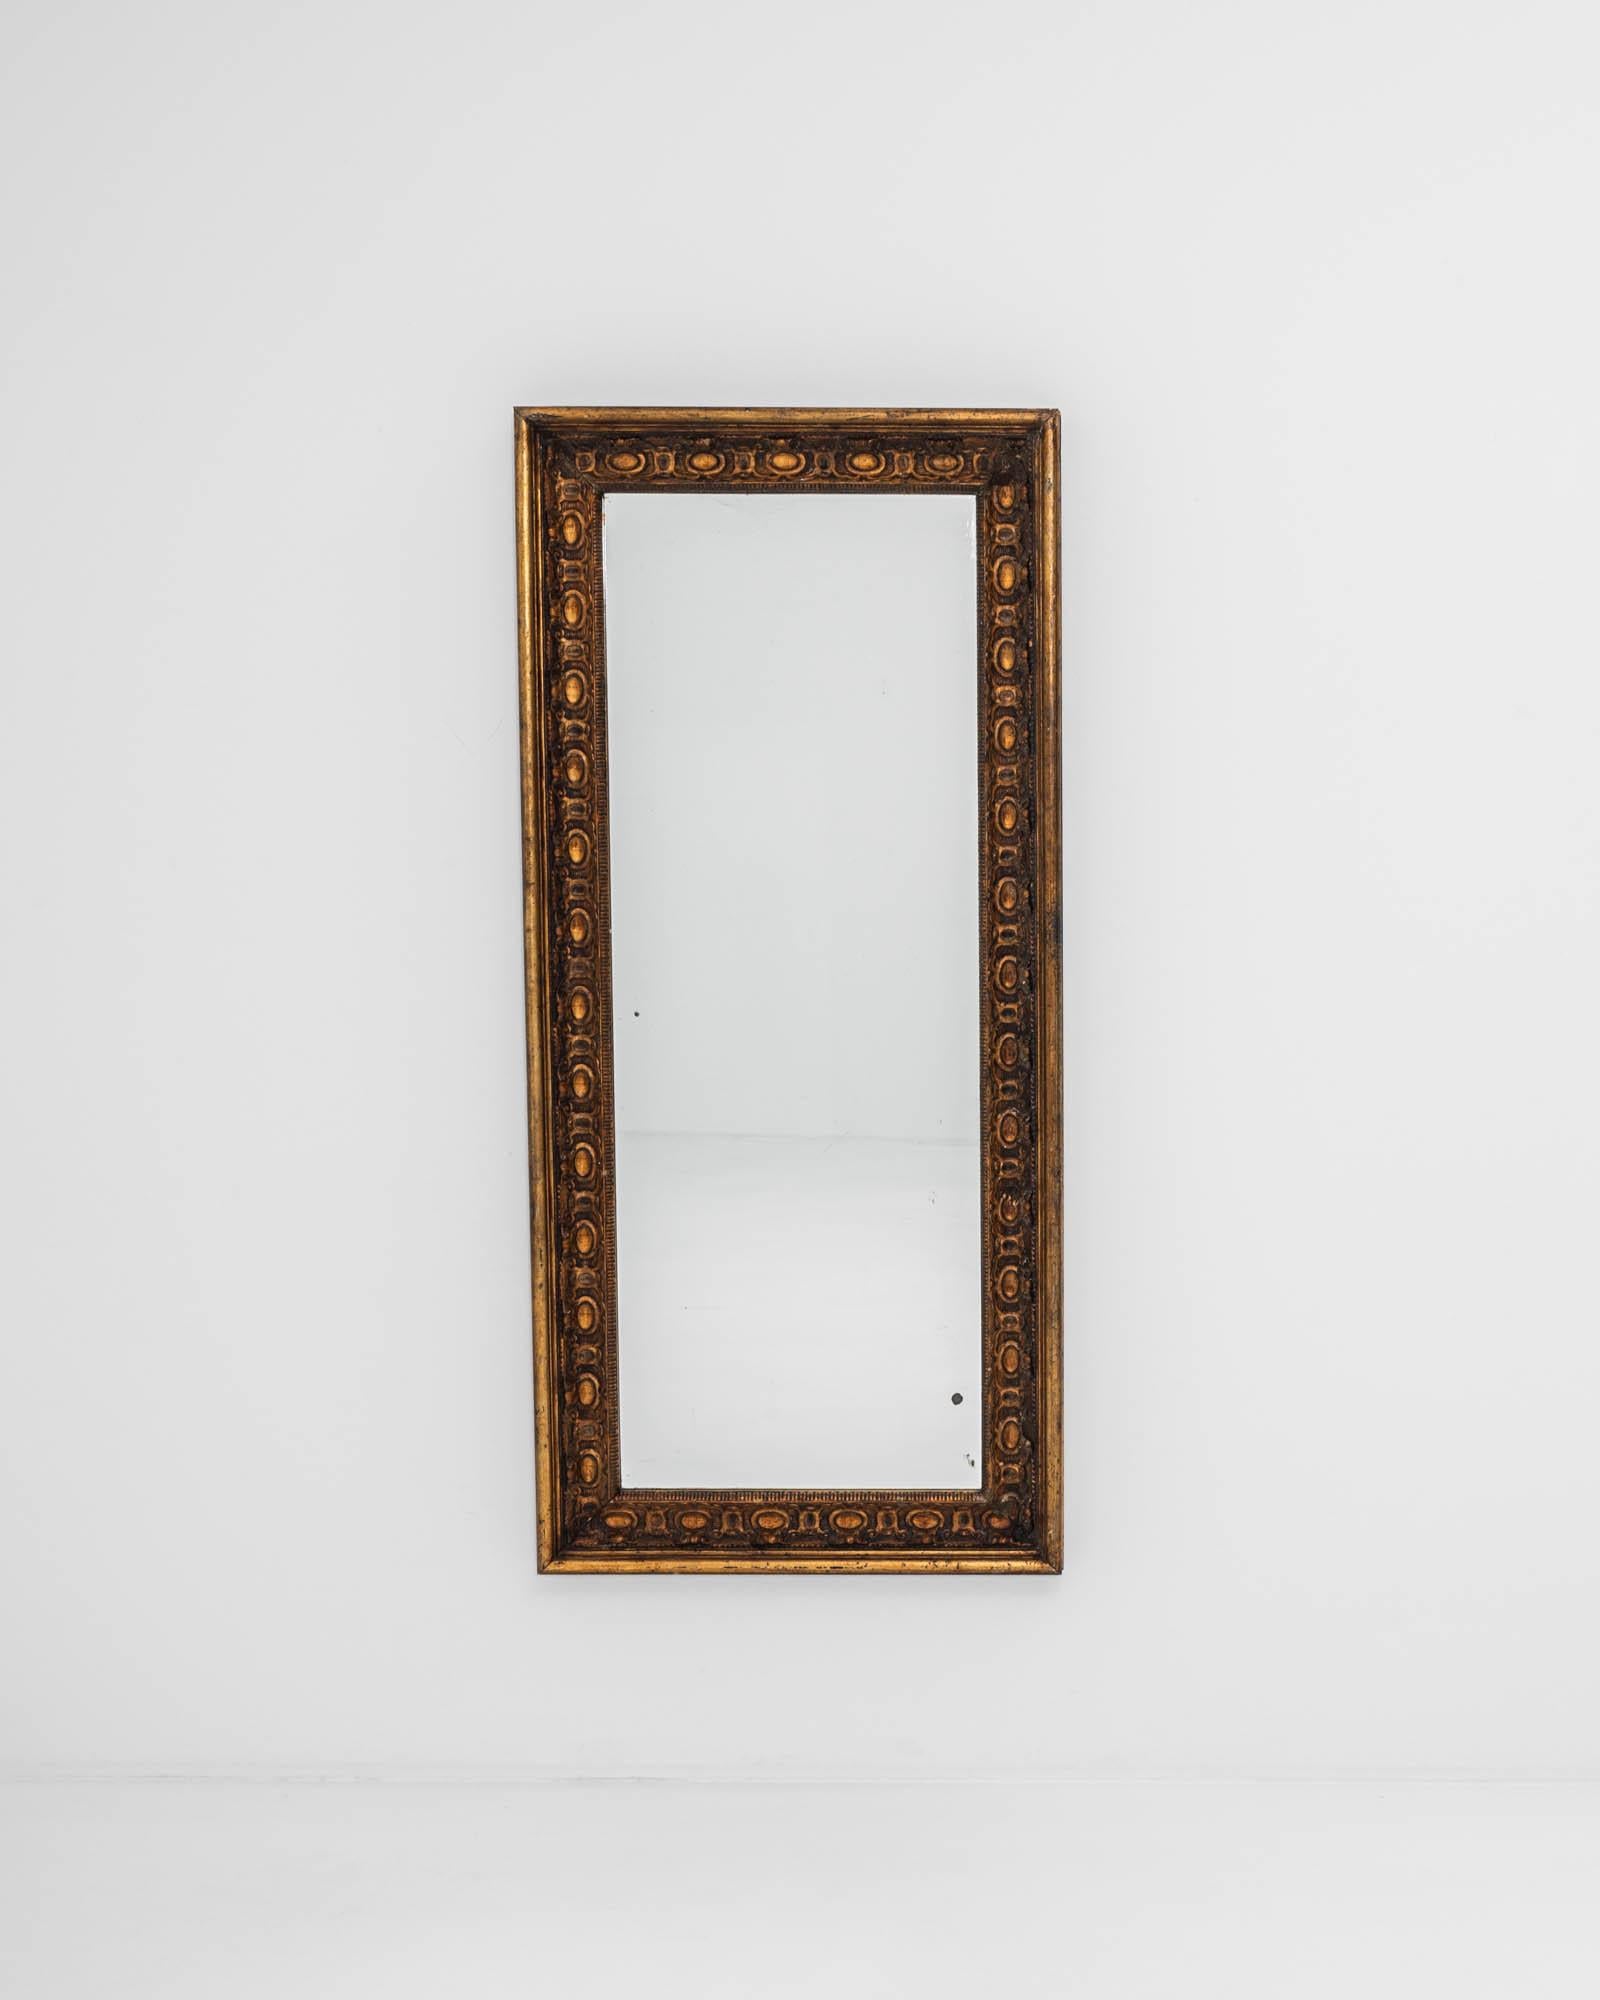 A giltwood mirror created in early 20th century France. Exquisitely sculpted and gilded, this antique mirror casts a spell upon the room. Wreathed in painstakingly hand-carved geometric patterning, the frame of the mirror leads one’s eyes carefully